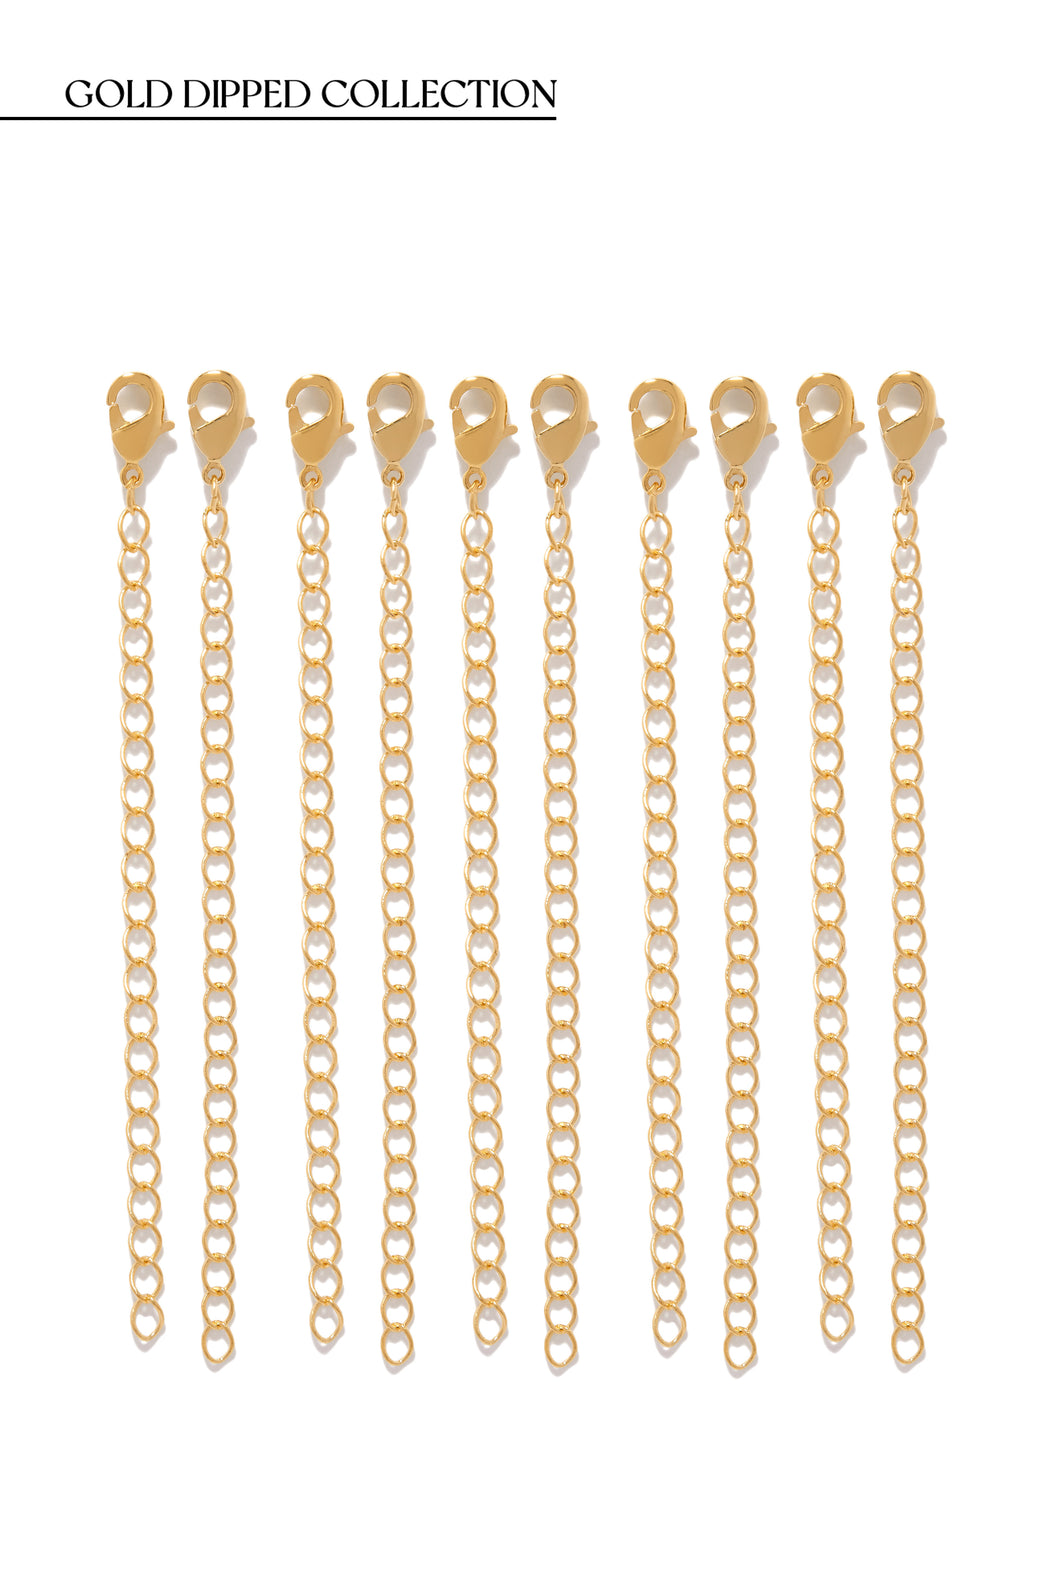 Gold Dipped Necklace Extenders 